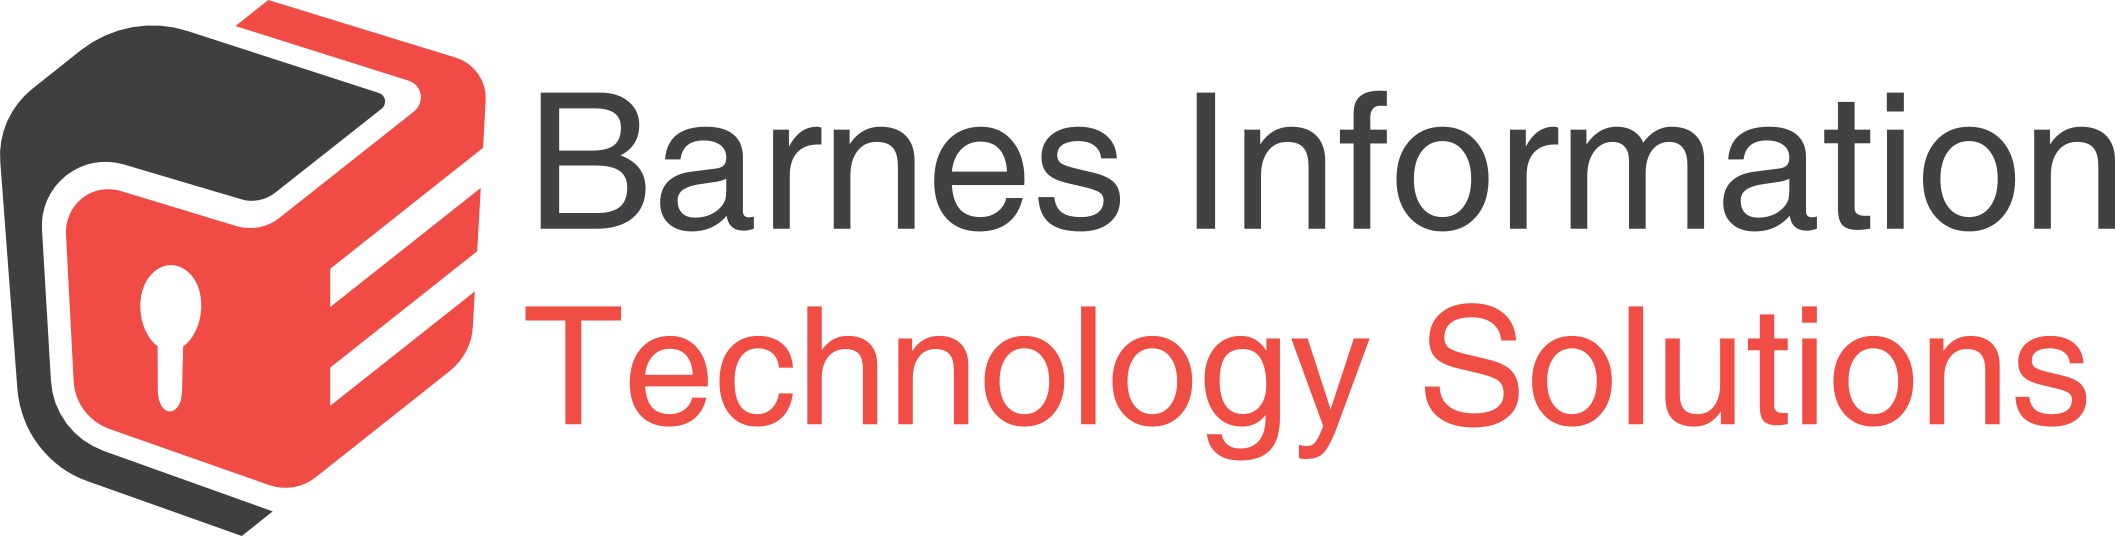 Barnes Information Technology Solutions